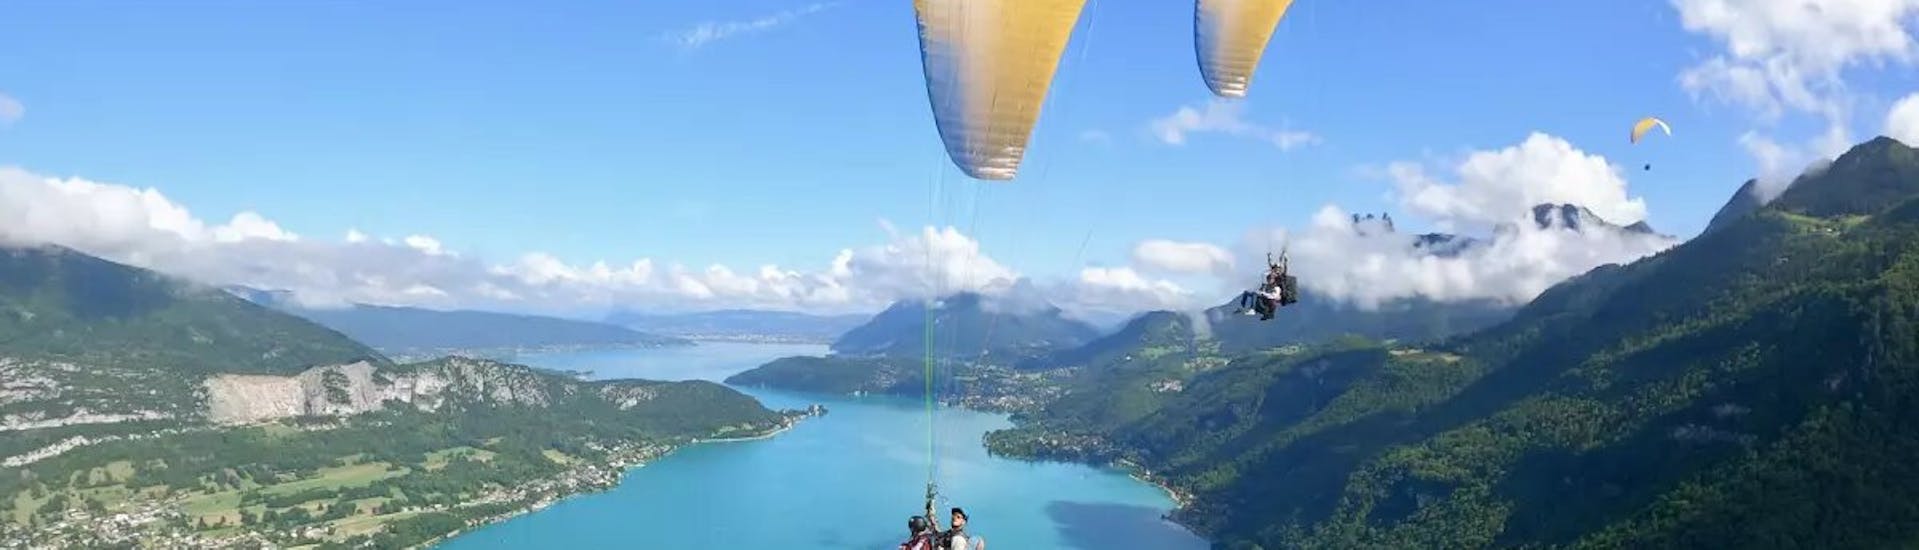 Tandem-Paragliding über dem Annecy-See - Minipouss & Discovery (ab 5 J.).